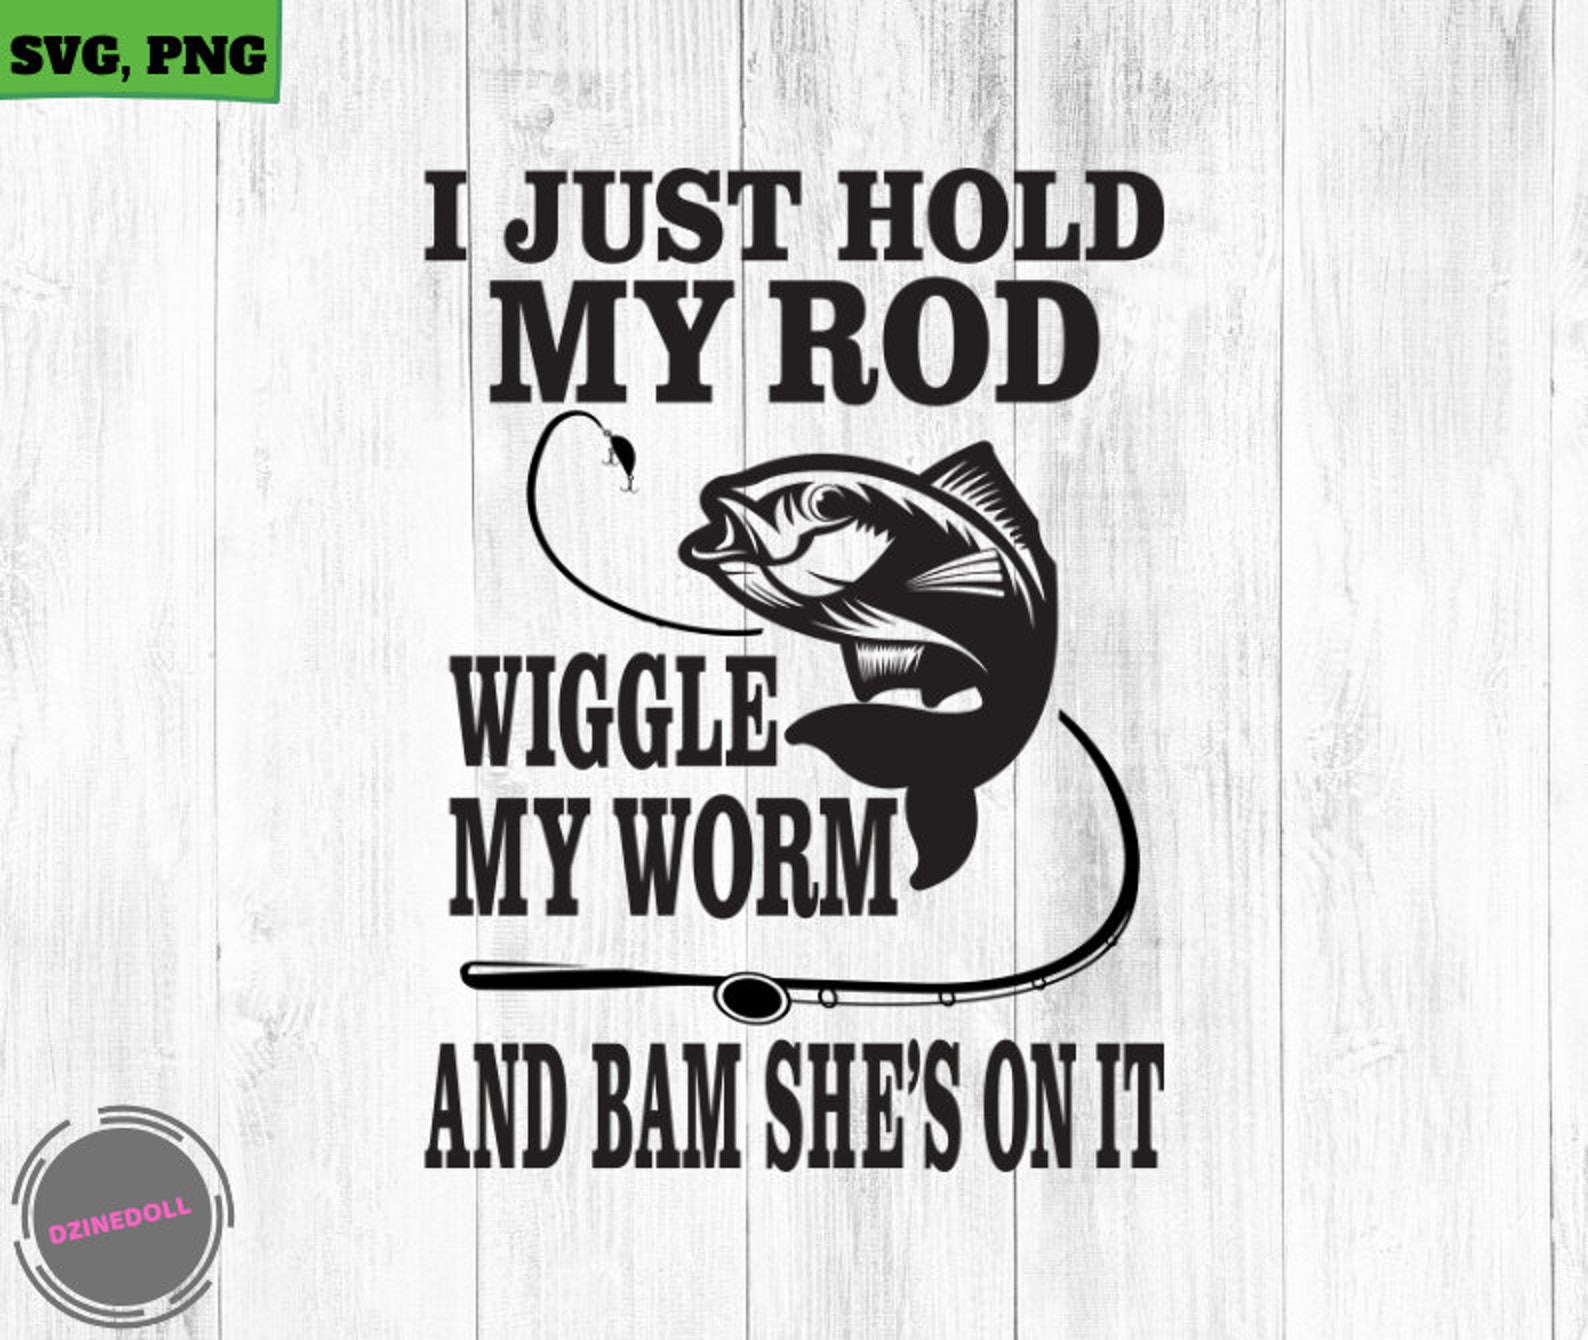 I just hold my rod wiggle my worm Fishing svg fishing | Etsy